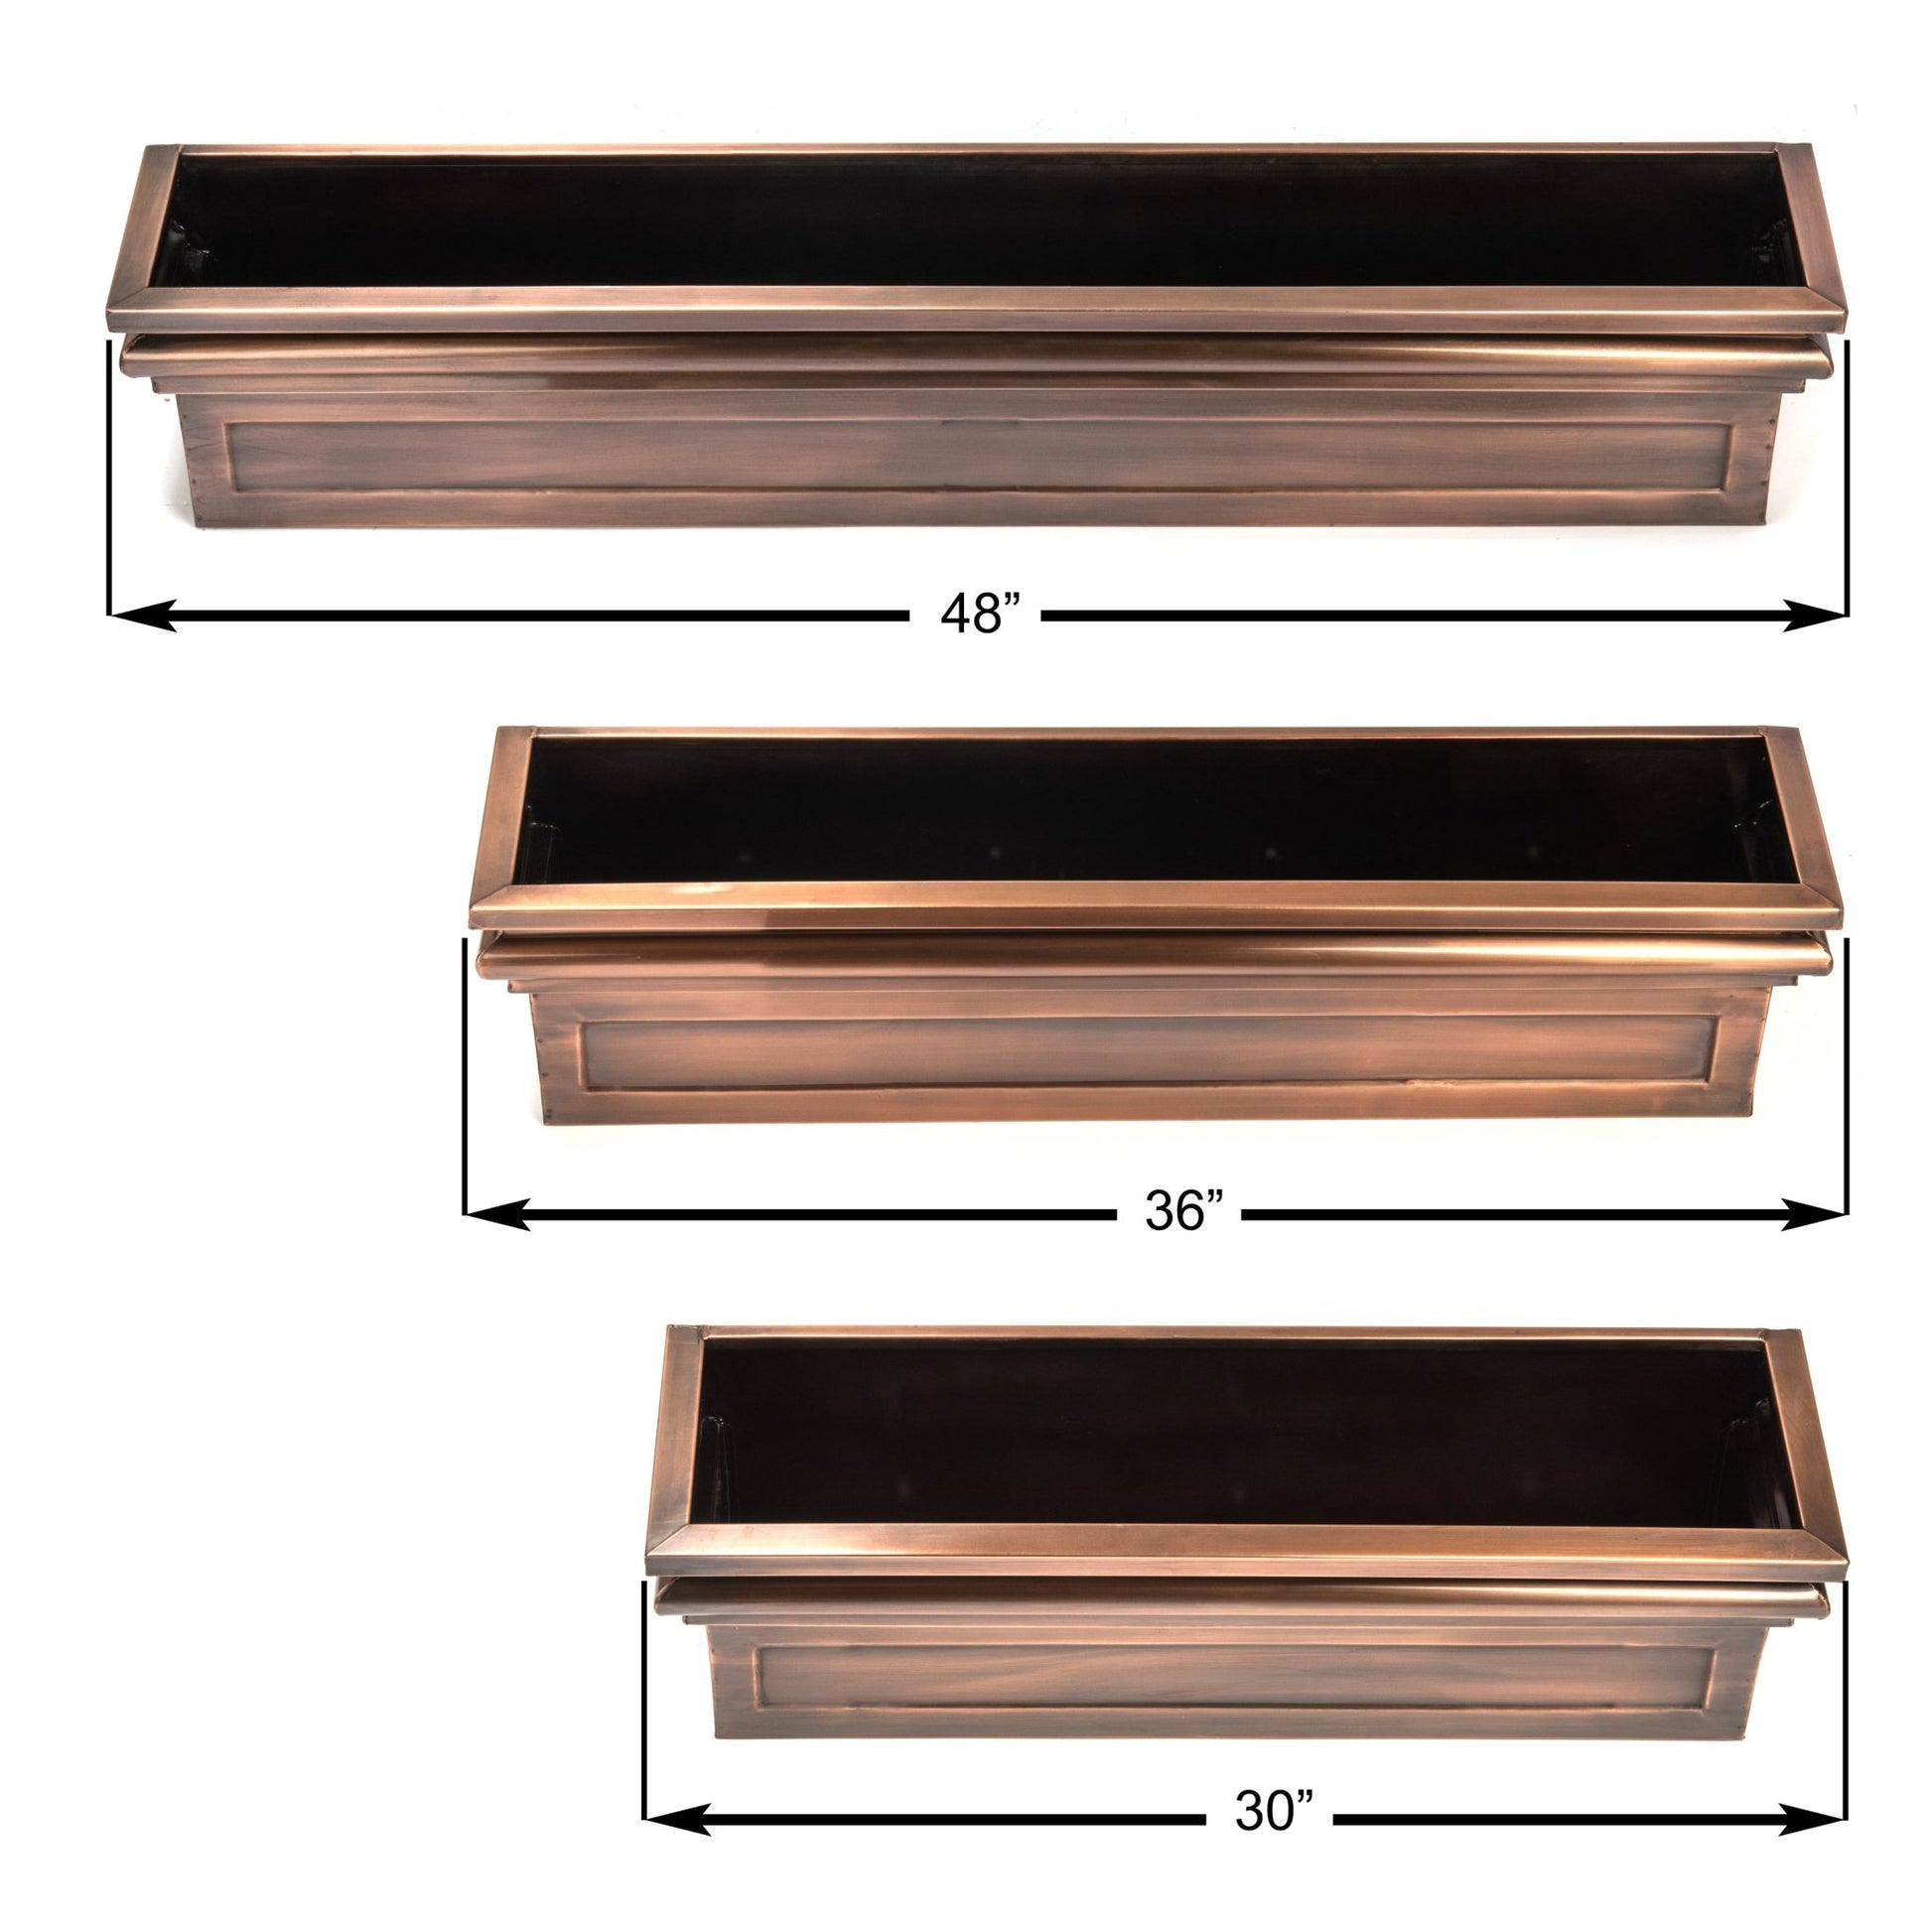 H Potter antique copper window planter box available in three sizes 